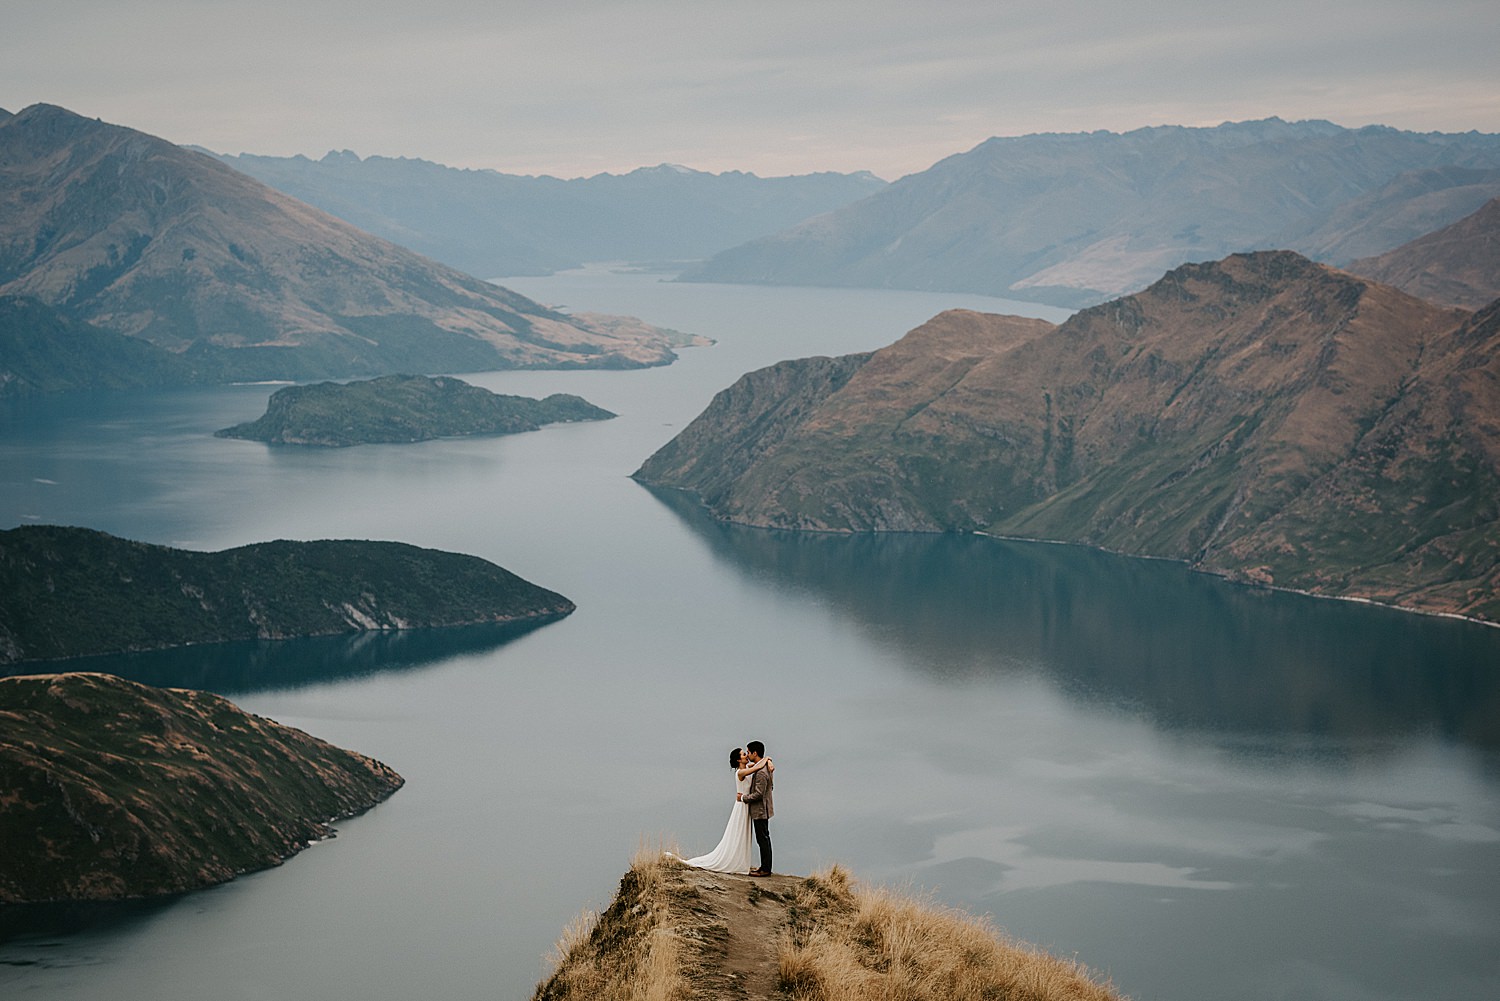 Couple embrace on a high peak with the lake and rolling mountains in the background near Queenstown.